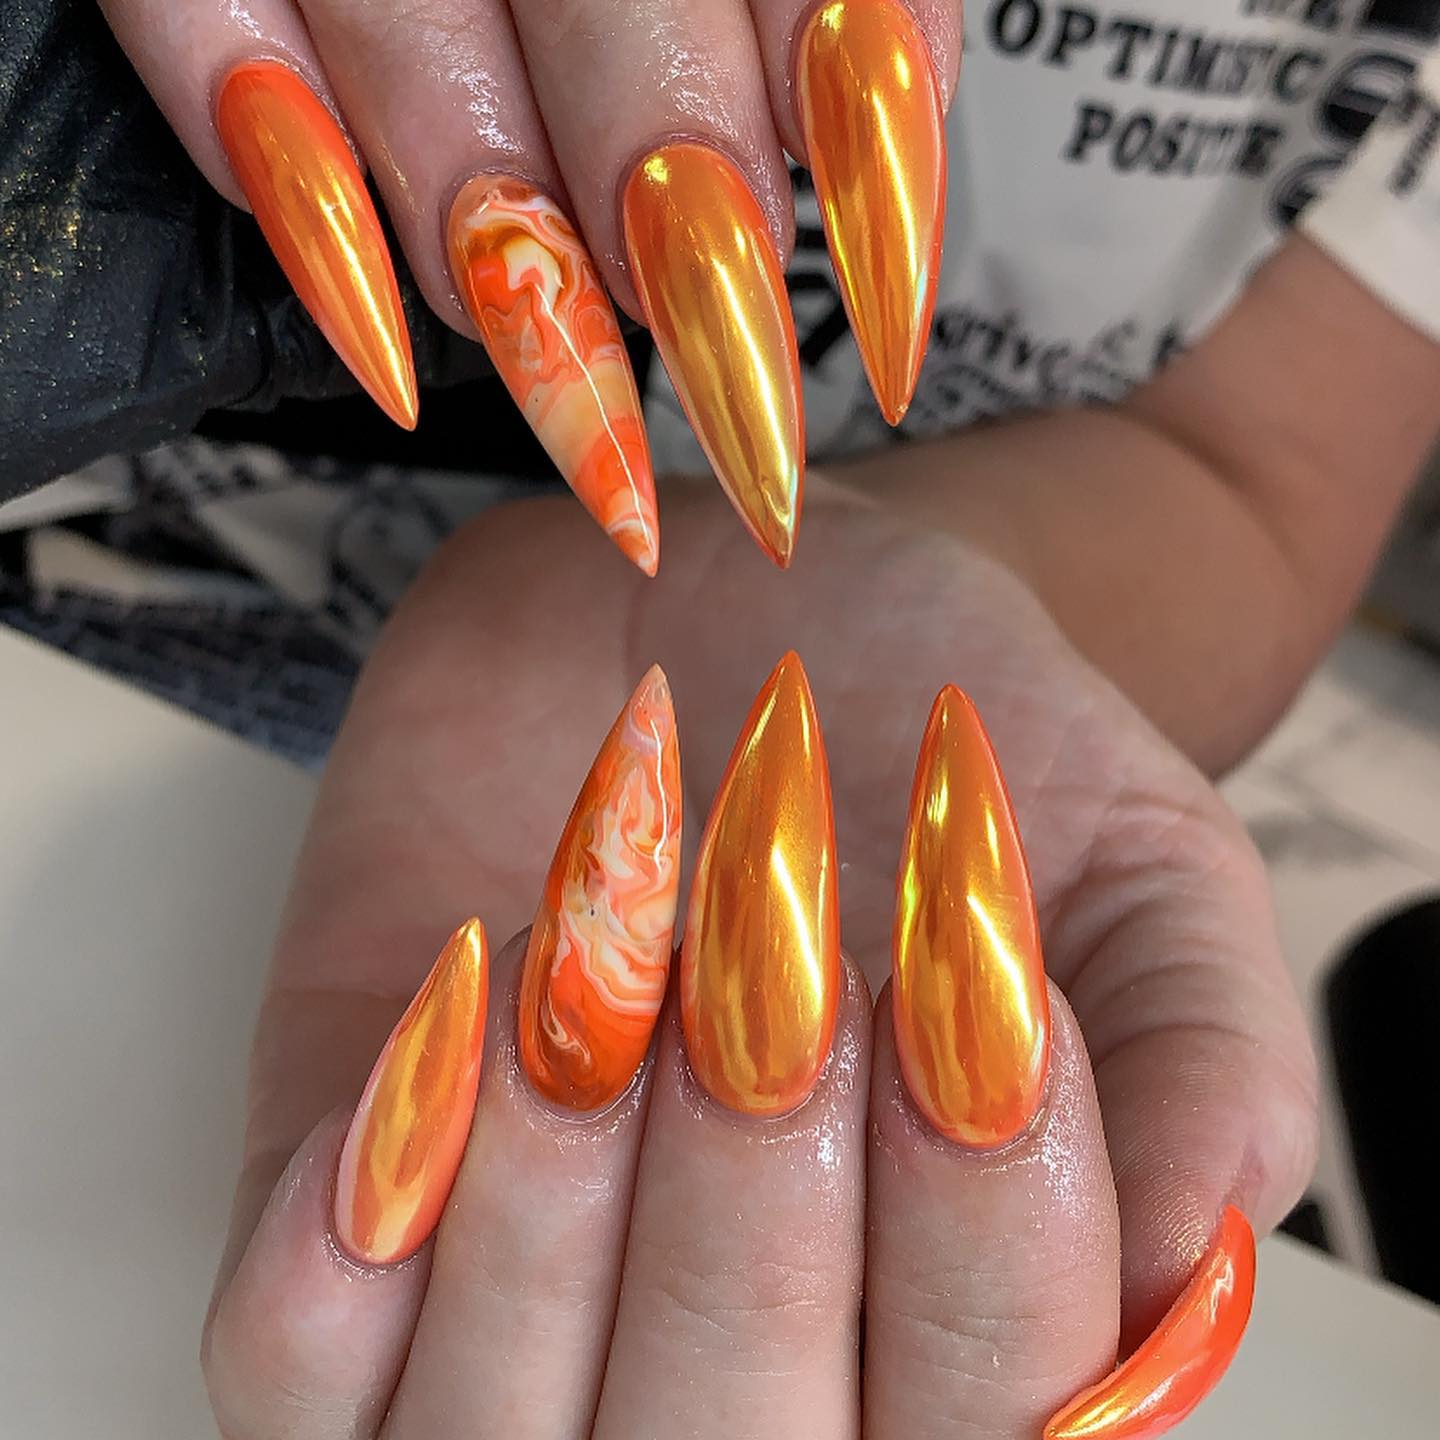 Orange nails are quite original and popular. To try something new and look amazing in sunny days, you should definitely use this color.